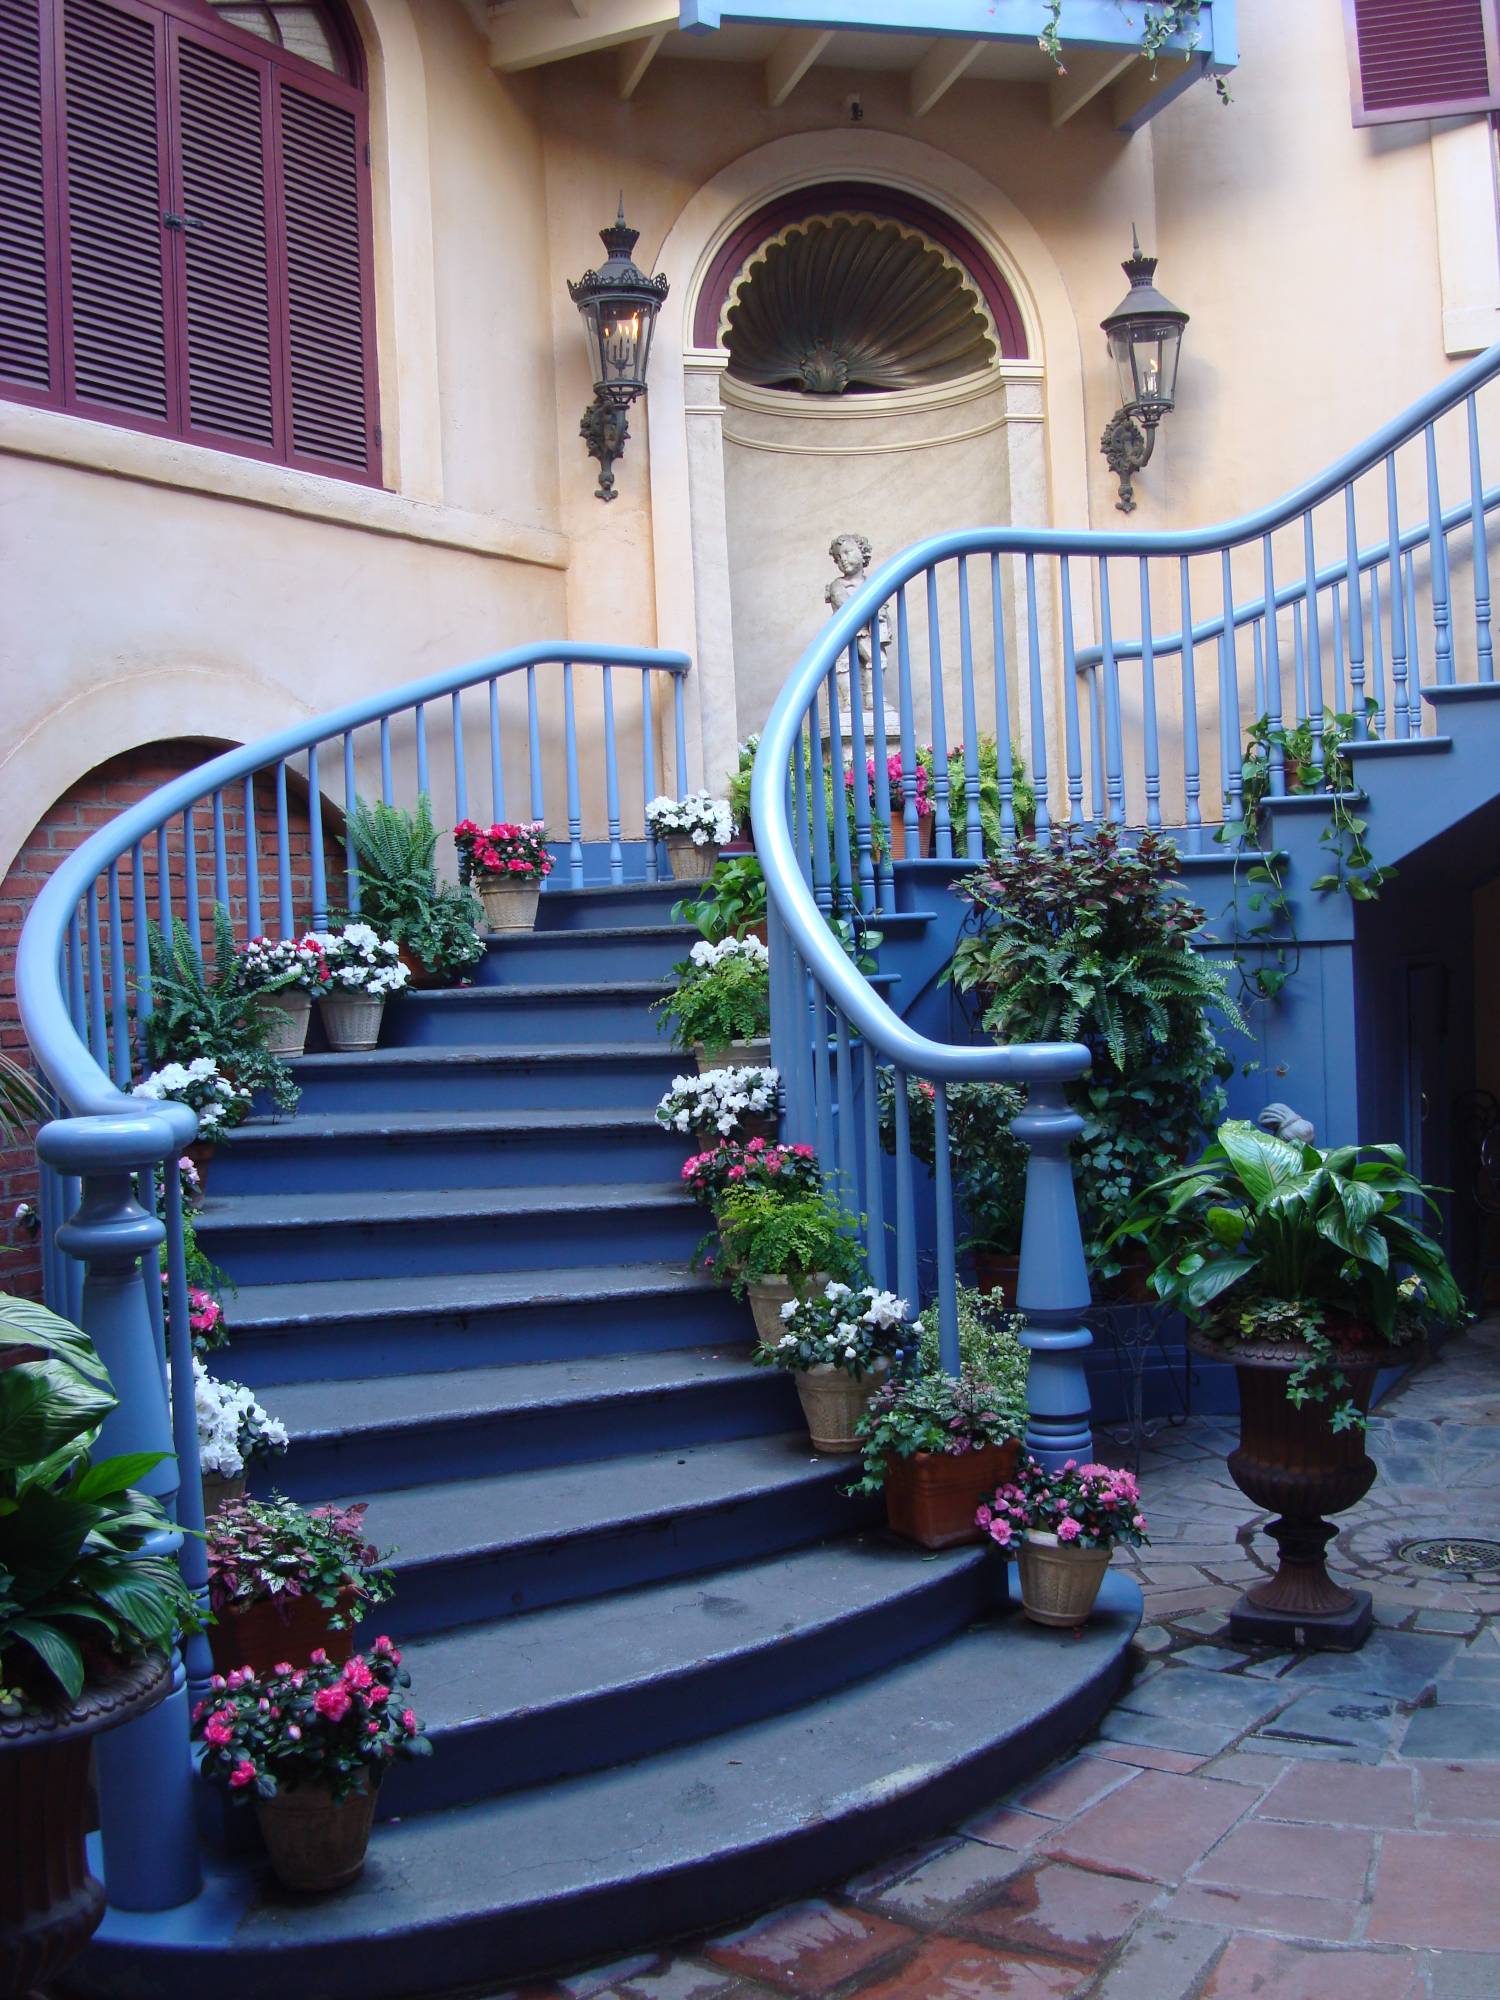 New Orleans Square - Stairway to Walt Disney's Apartment